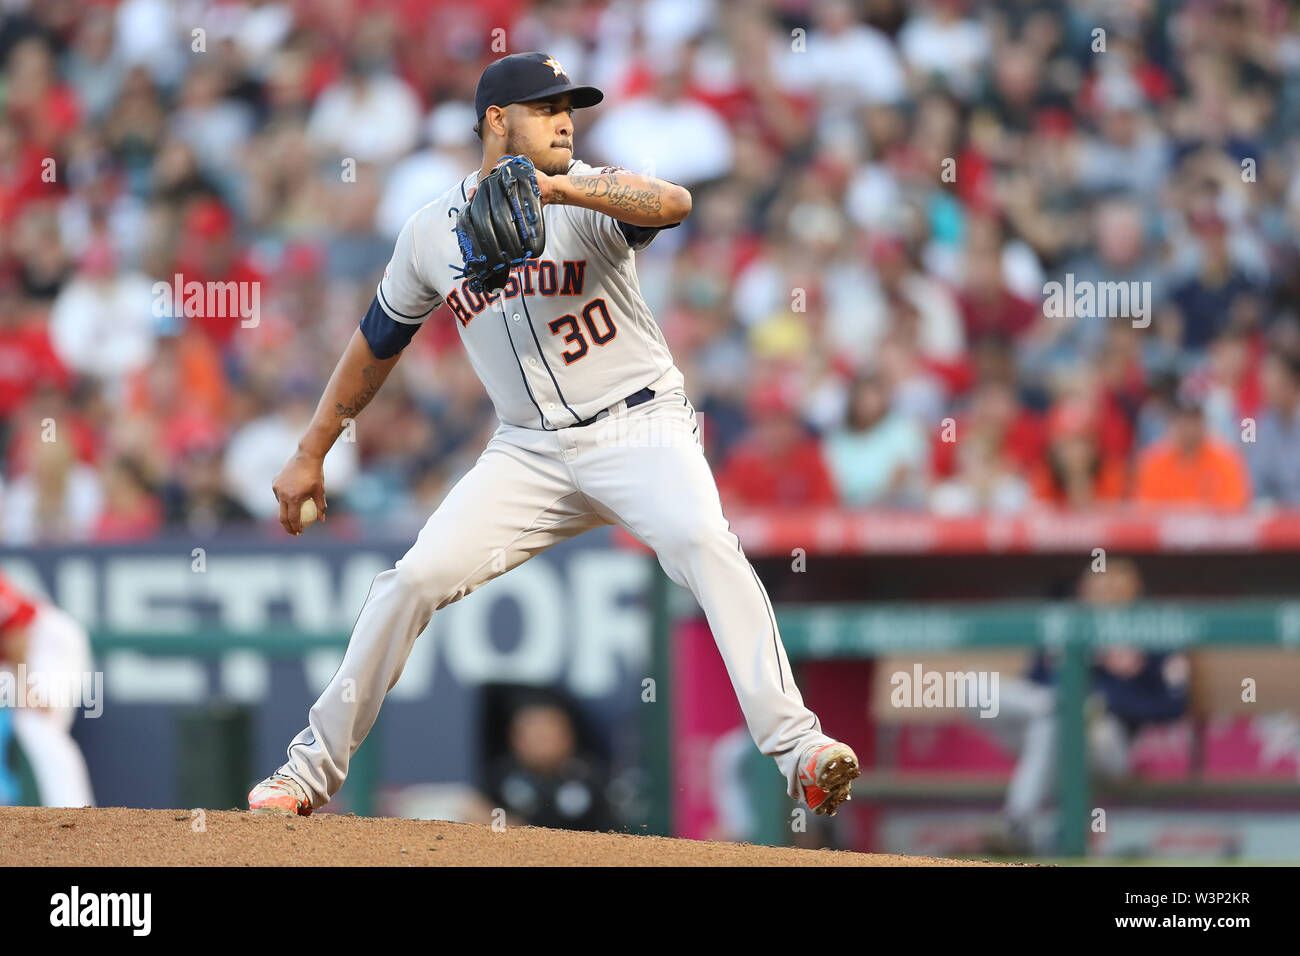 July 16, 2019: Houston Astros relief pitcher Hector Rondon (30) makes the start for Houston during the game between the Houston Astros and the Los Angeles Angels of Anaheim at Angel Stadium in Anaheim, CA, (Photo by Peter Joneleit, Cal Sport Media) Stock Photo